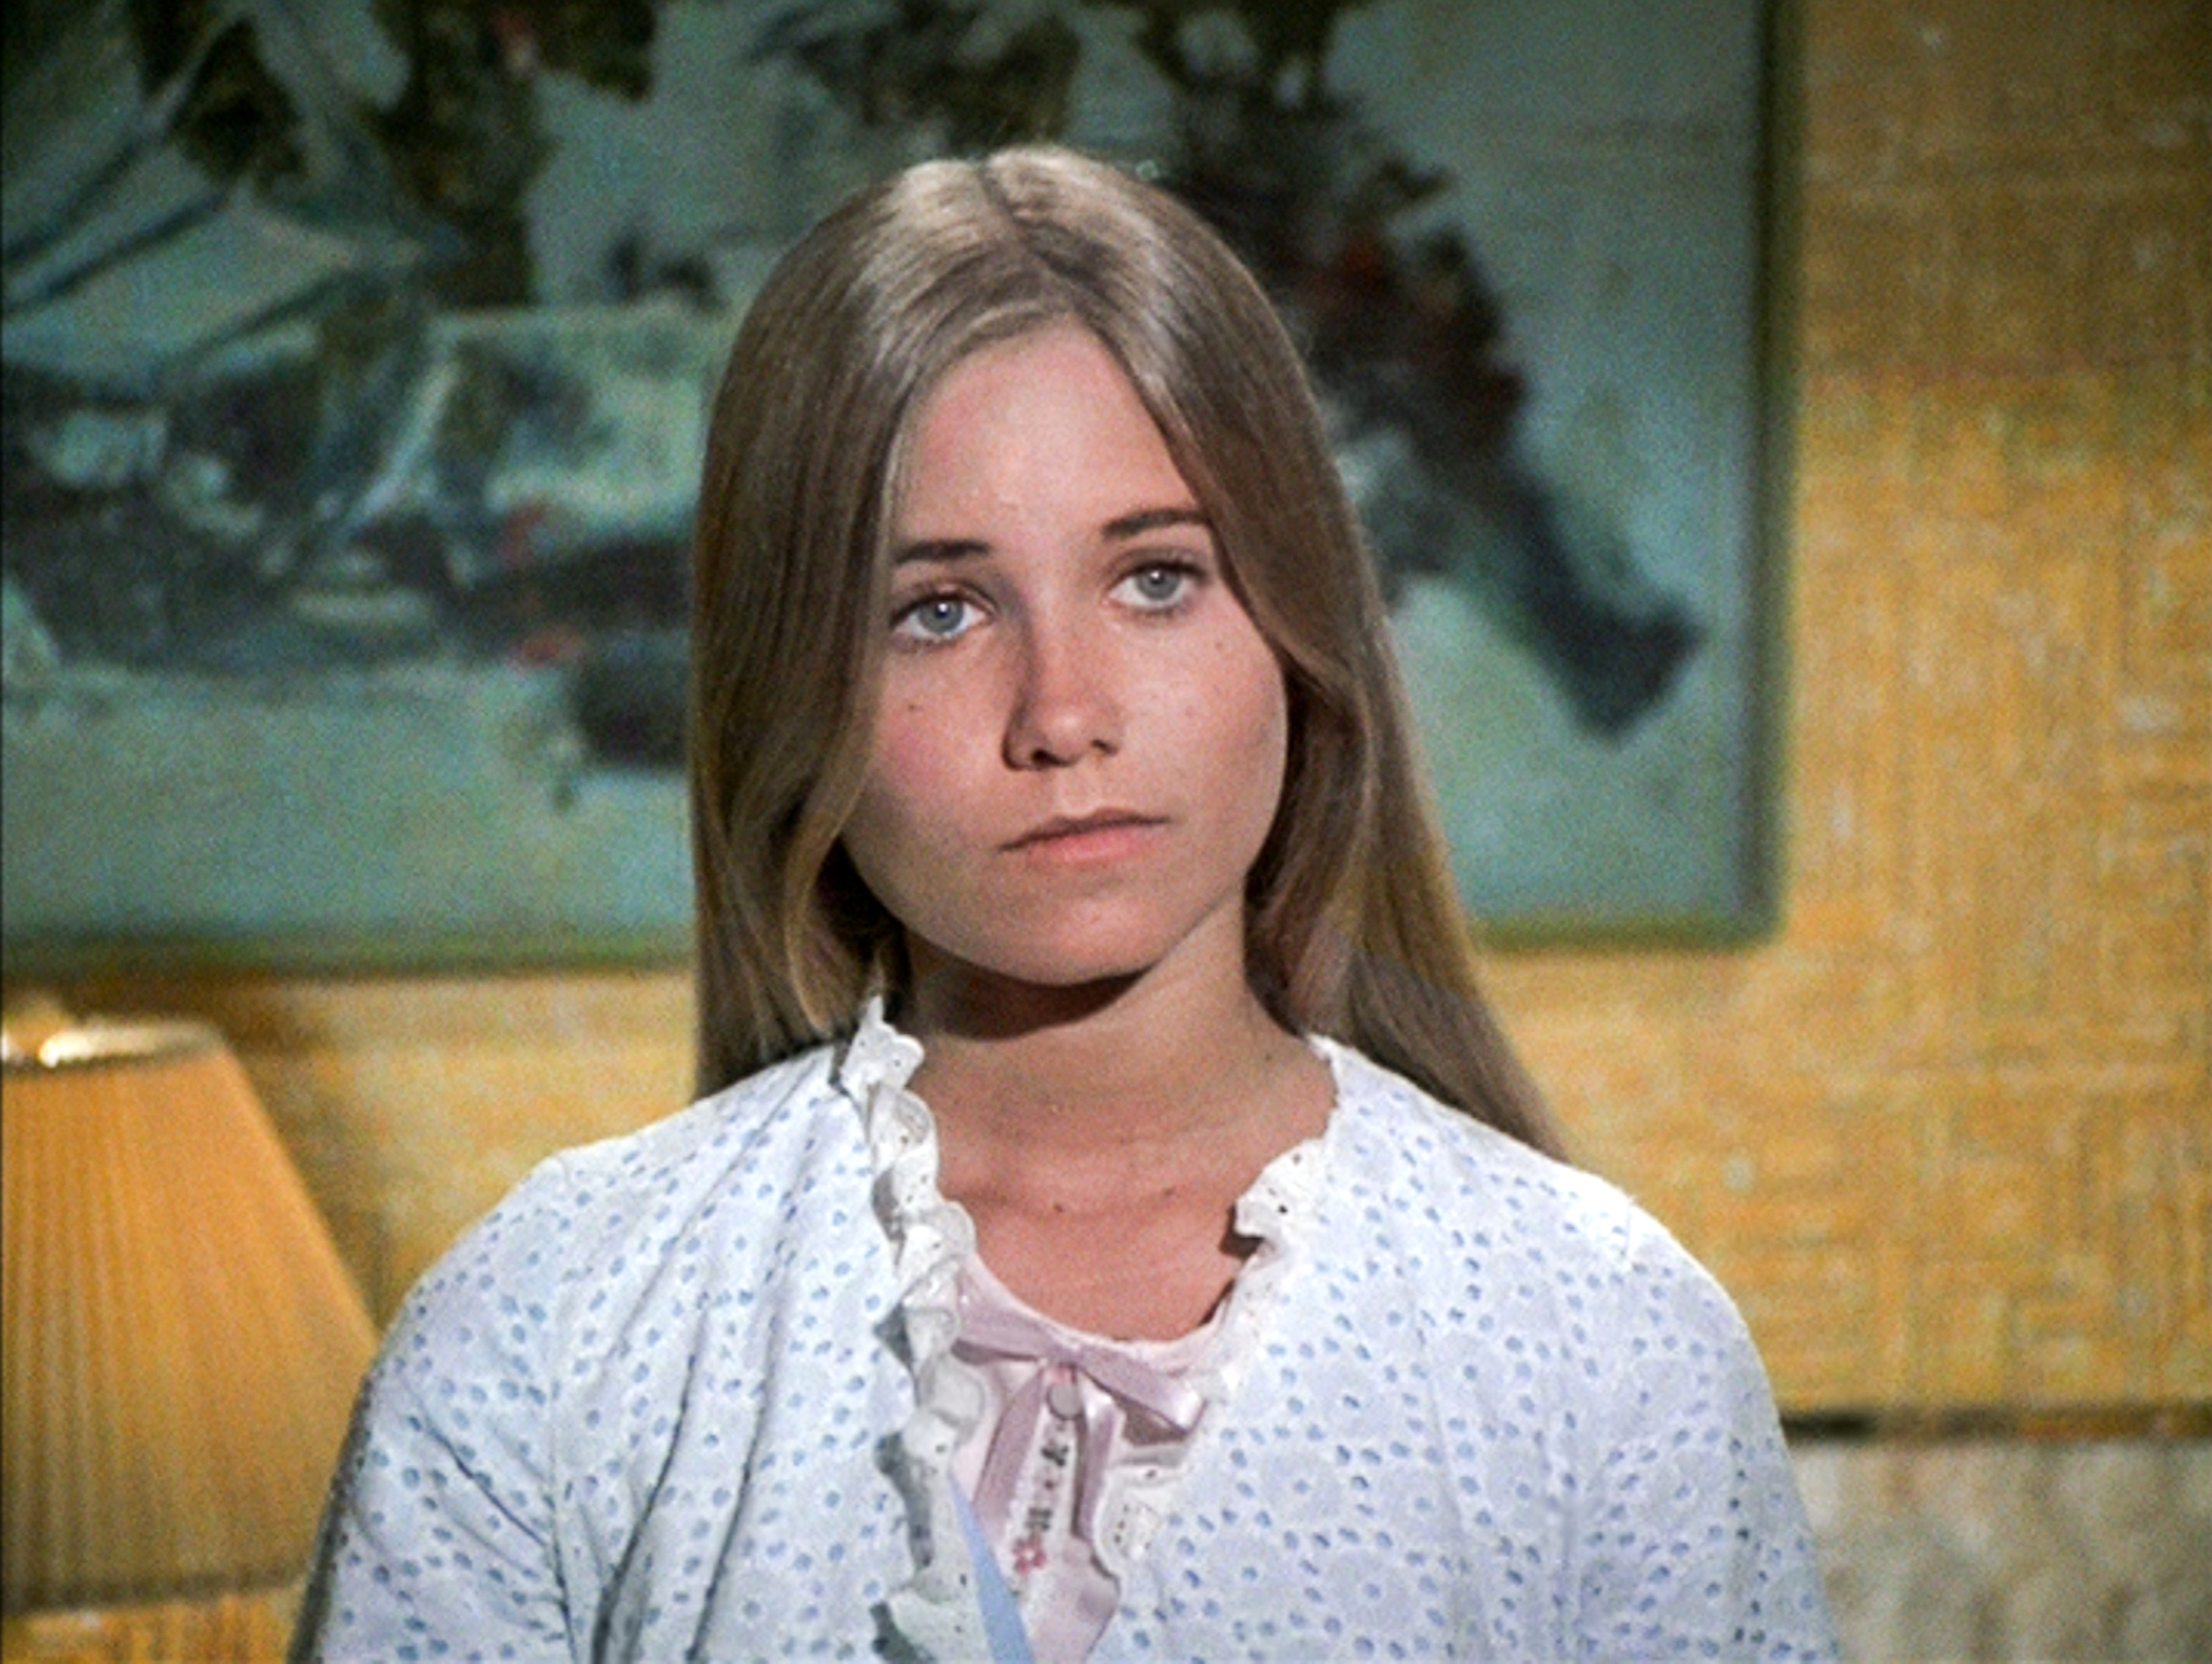 Maureen McCormick as Marcia Brady in the "Pass The Tabu" episode of "The Brady Bunch" in Los Angeles, 1972 | Source: Getty Images